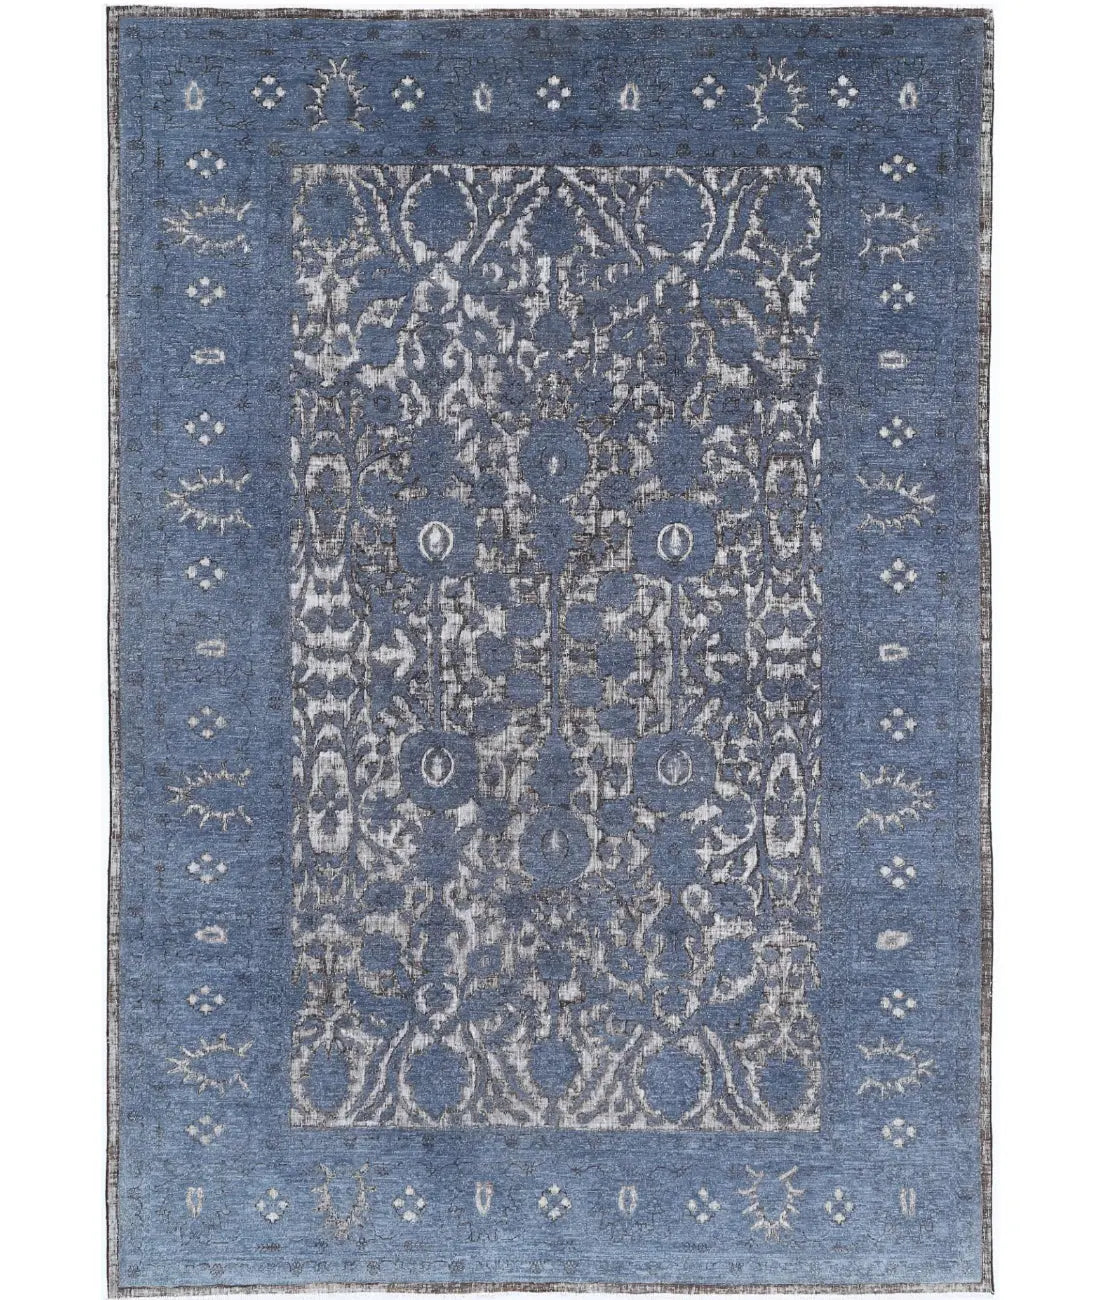 Hand Knotted Onyx Wool Rug - 6'1'' x 8'9''